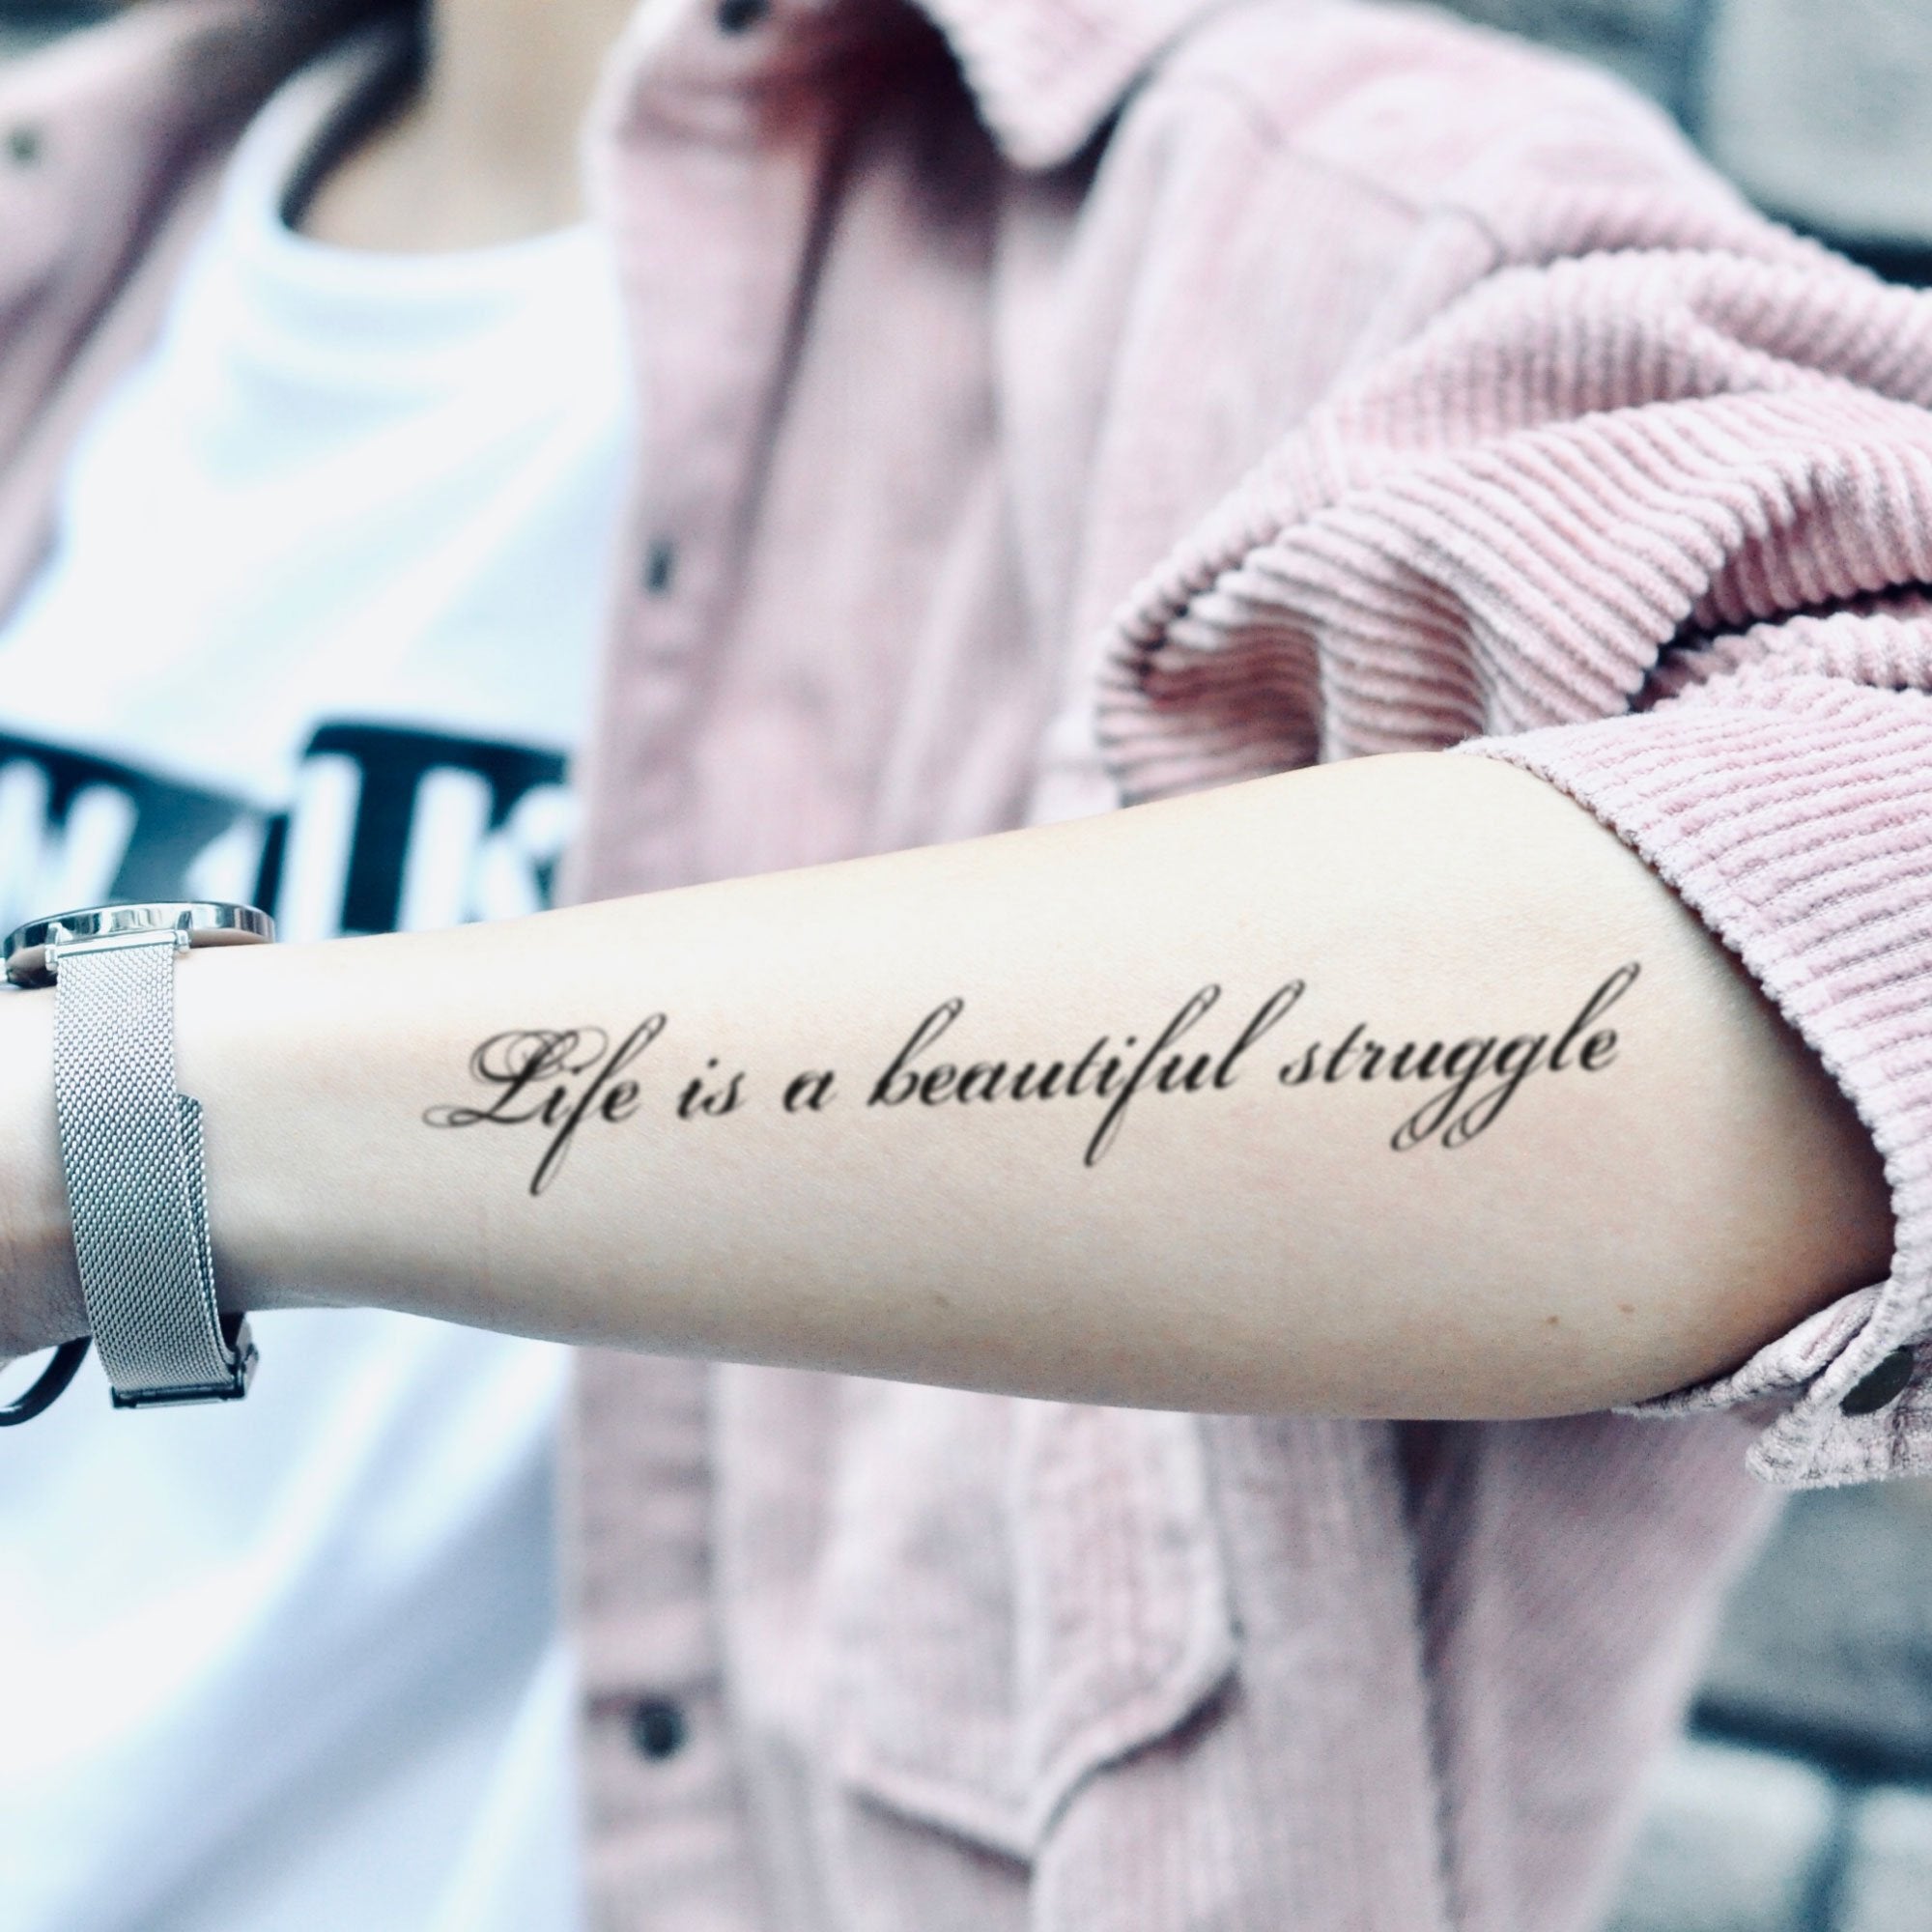 Life is a beautiful struggle My life is finally come to a good balance  this tattoo signifies that t  Struggle tattoo Beautiful tattoos  Tattoos for daughters